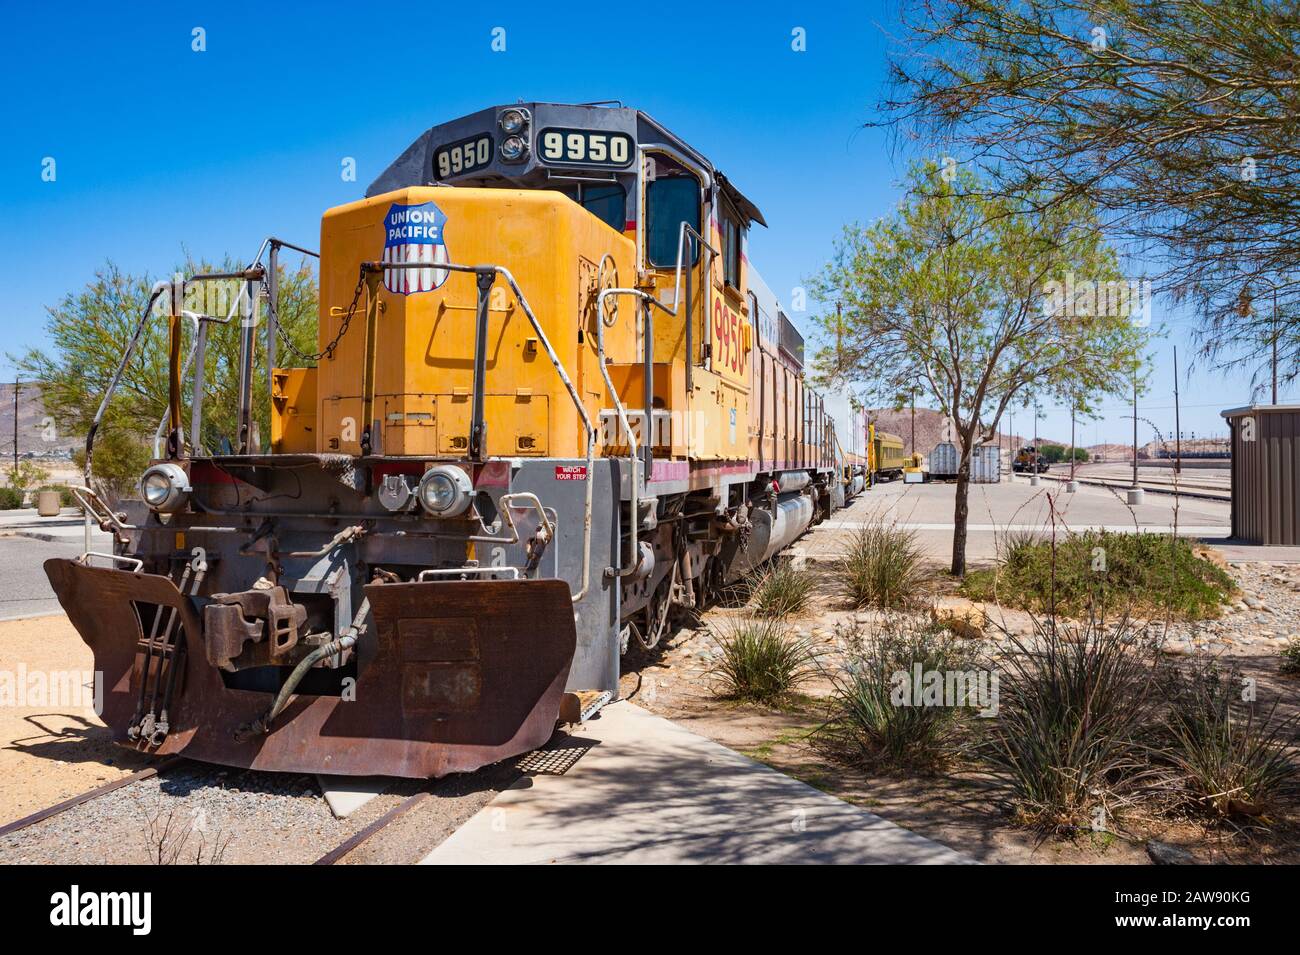 Barstow, California, USA - 23rd April 2013: old vintage Union Pacific locomotive at Western America Railroad Museum in Barstow, California Stock Photo